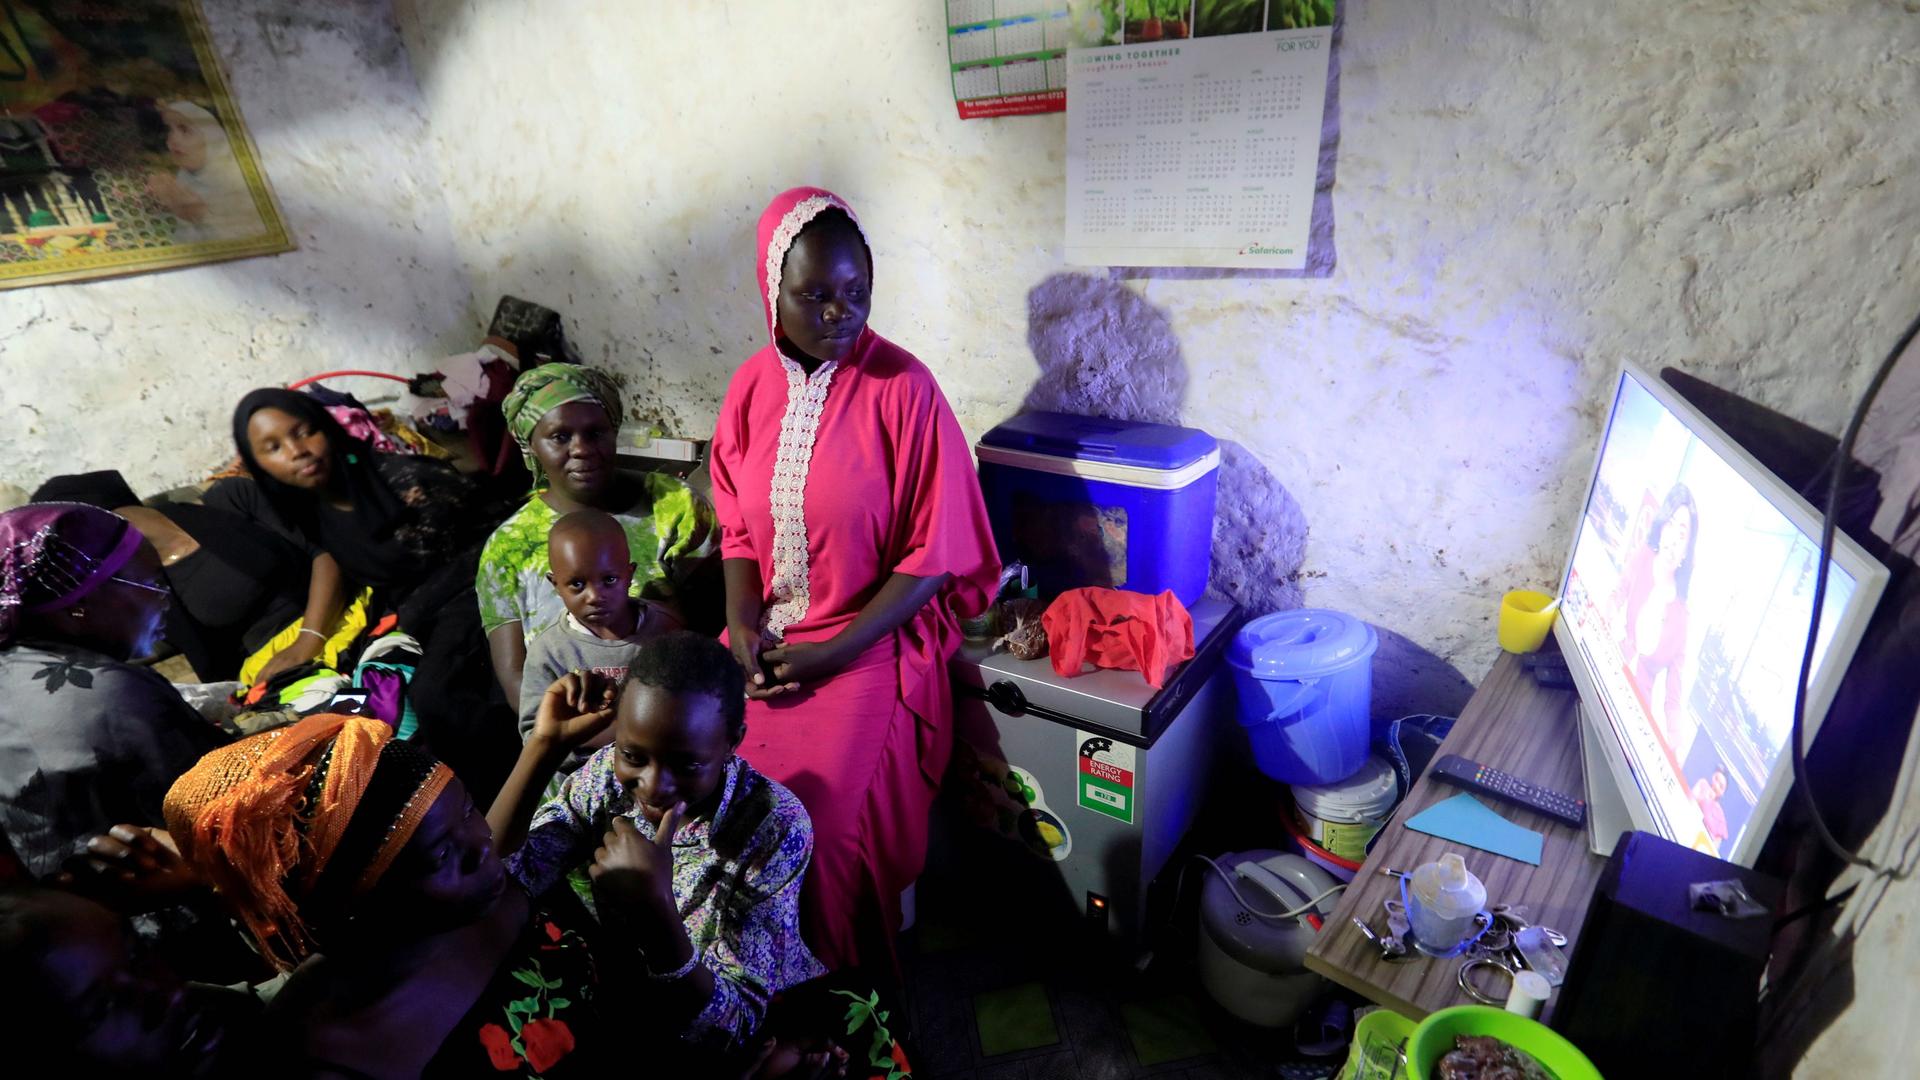 Residents watch a television at the beginning of a curfew which was ordered by the Kenya's President Uhuru Kenyatta to contain the spread of the coronavirus disease (COVID-19) inside a house within Kibera slums in Nairobi, Kenya, March 27, 2020.